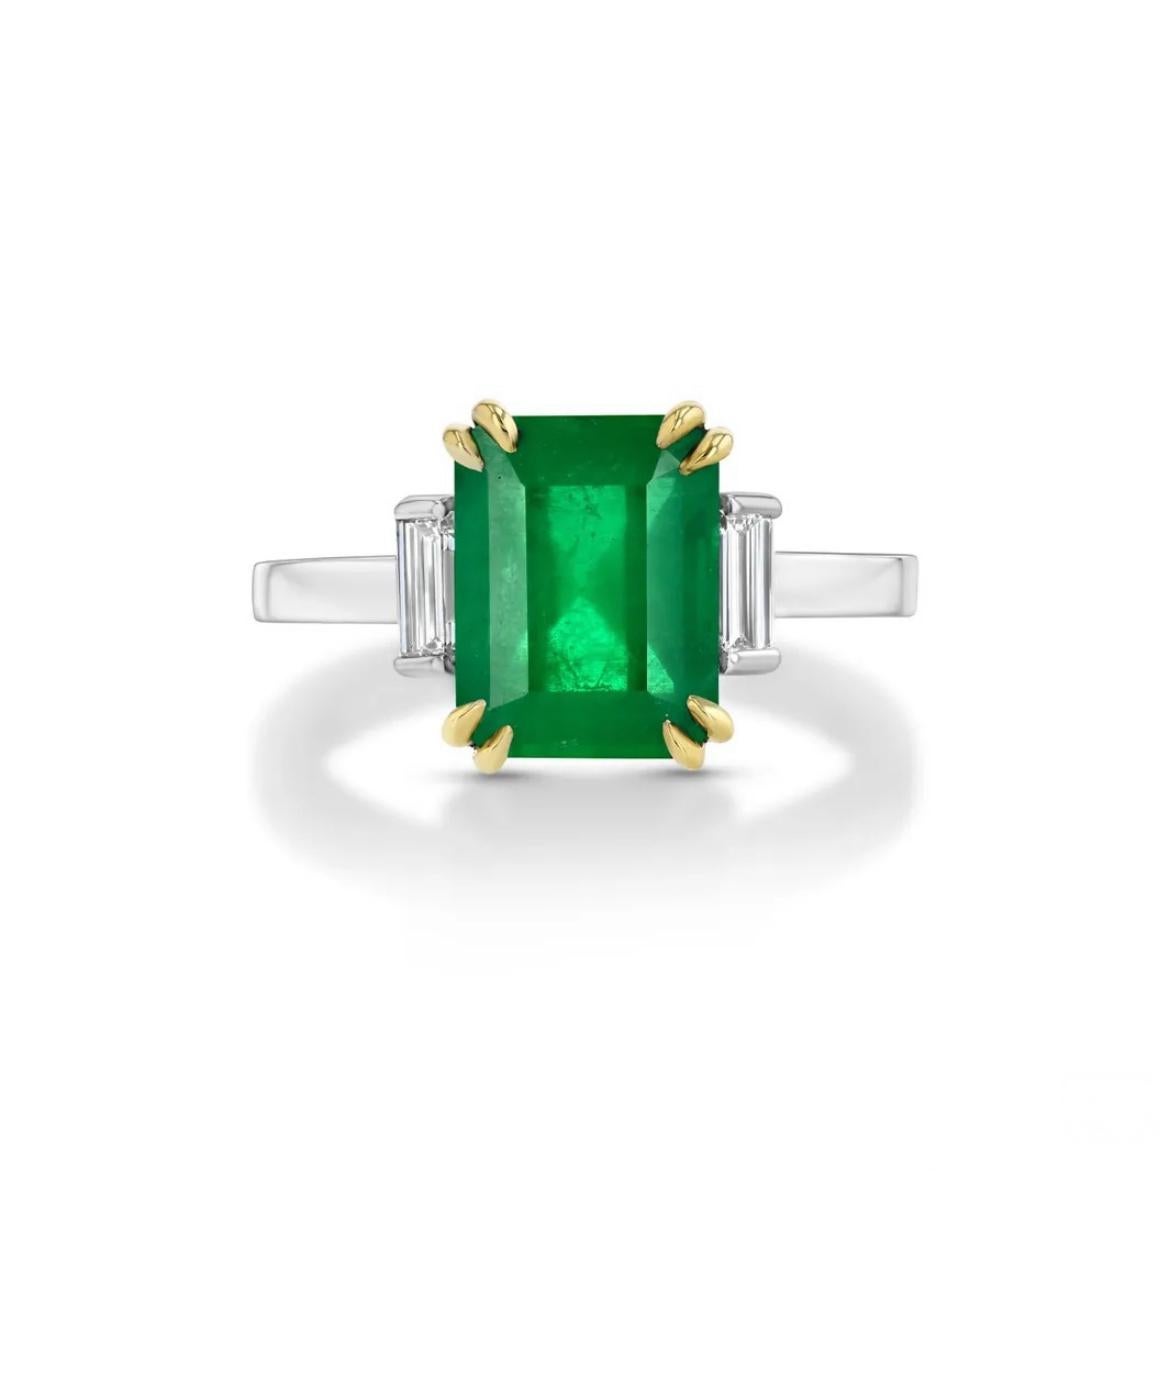 18K white with yellow gold ring, featuring a 2.82-carat GIA certified Zambian Emerald, flanked by two baguette diamond totaling 0.30cts. 